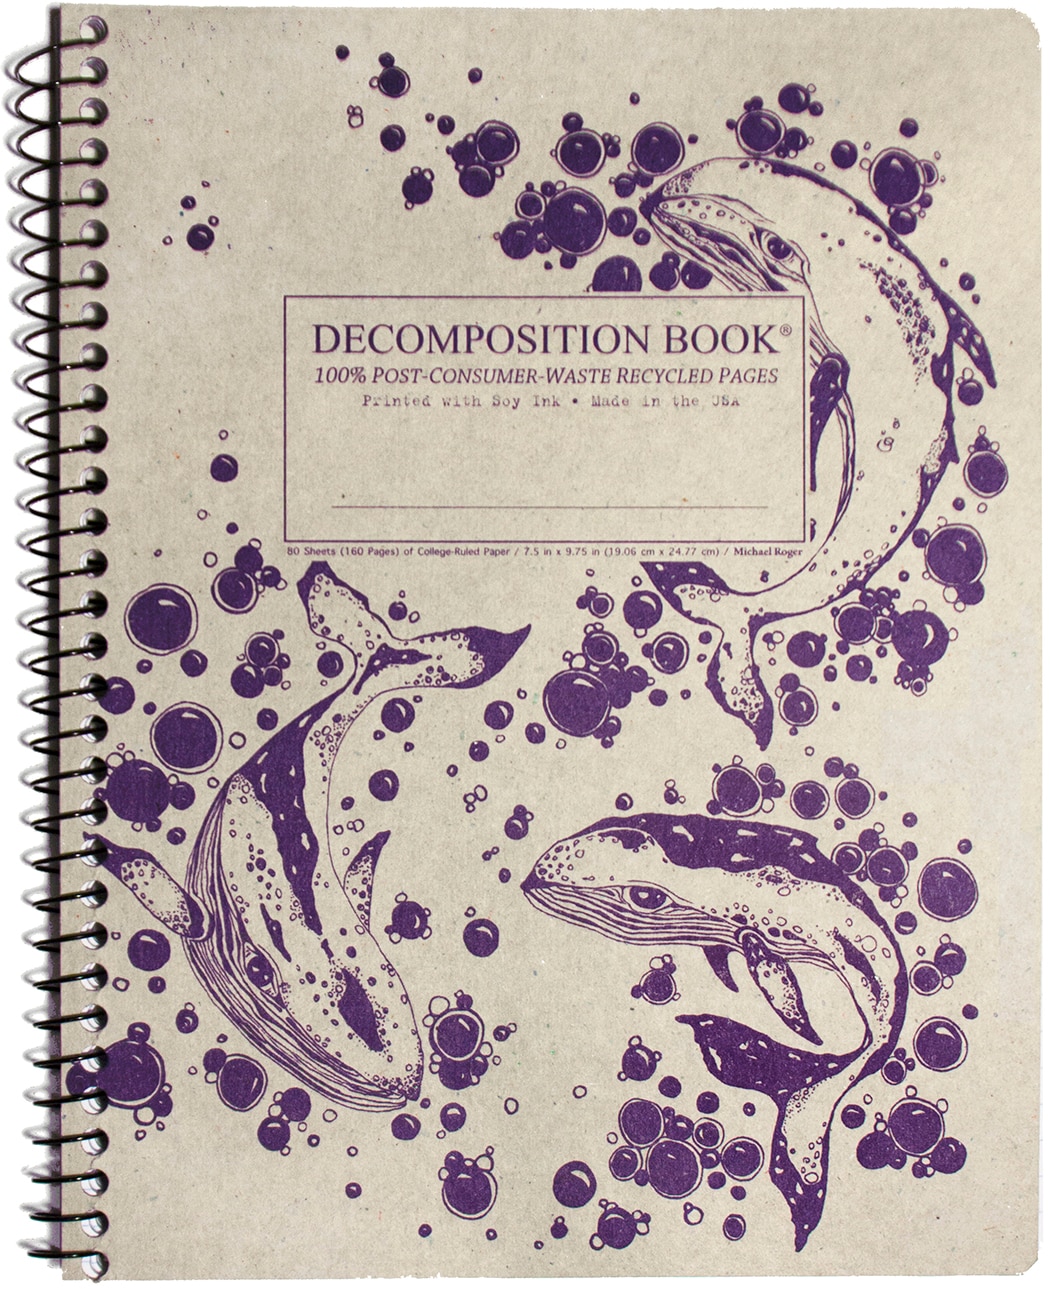 Michael Roger Humpback Whales Coilbound Decomposition Notebook